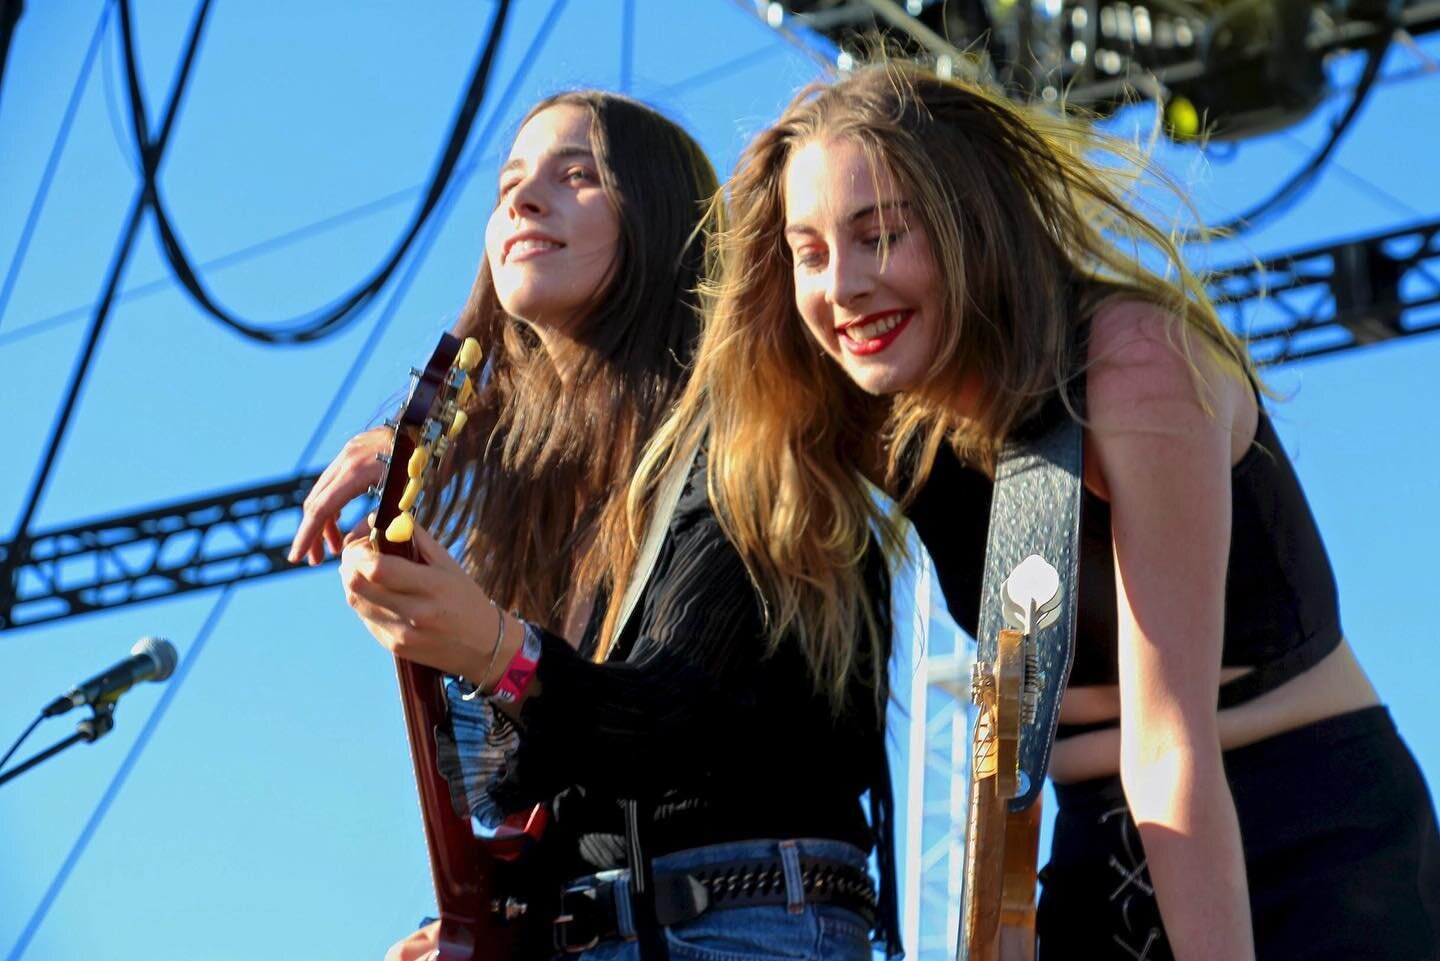 Haim performing at the Grammys tonight while up for Album of the Year, on Este&rsquo;s birthday, is good things happening to good people. Rooting for you guys and a bunch of other incredible artists! Coachella 2015, shot for LA magazine.